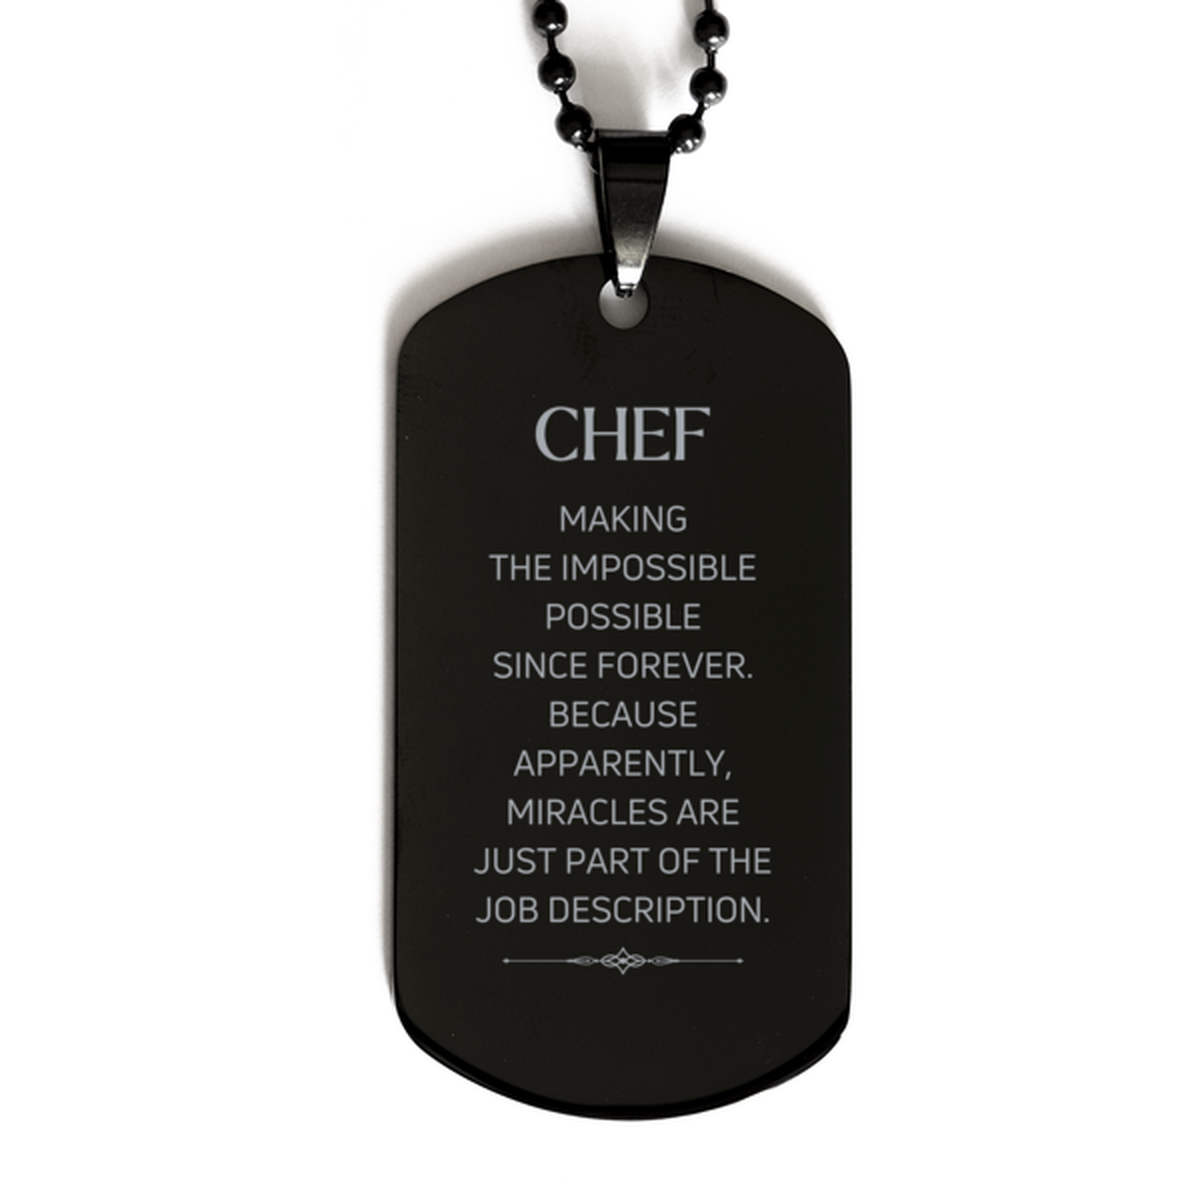 Funny Chef Gifts, Miracles are just part of the job description, Inspirational Birthday Black Dog Tag For Chef, Men, Women, Coworkers, Friends, Boss